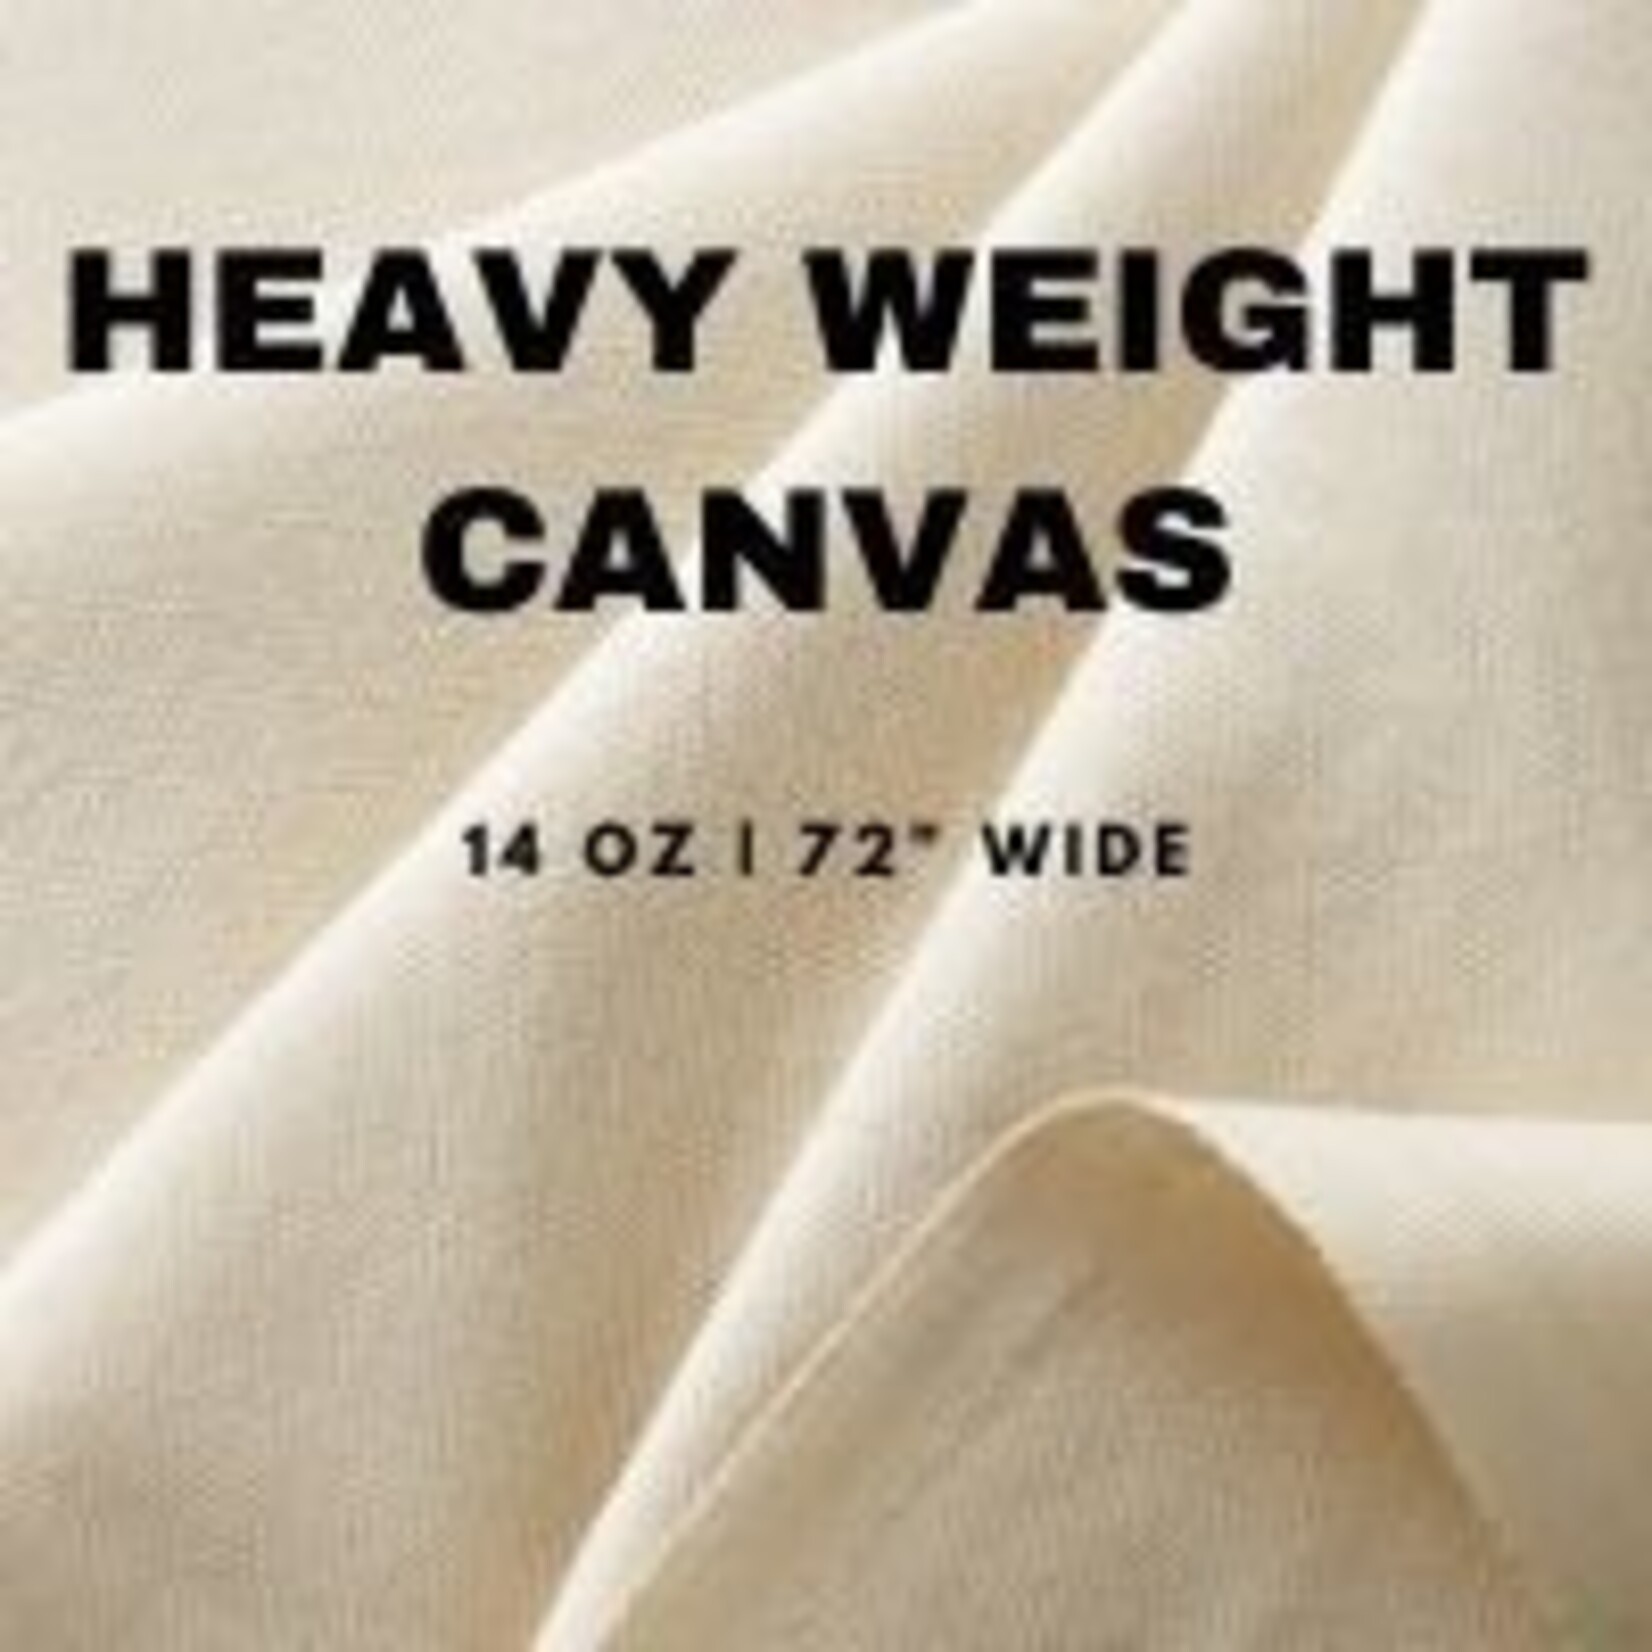 none Heavy Weight Canvas 72" 14Oz By The Foot